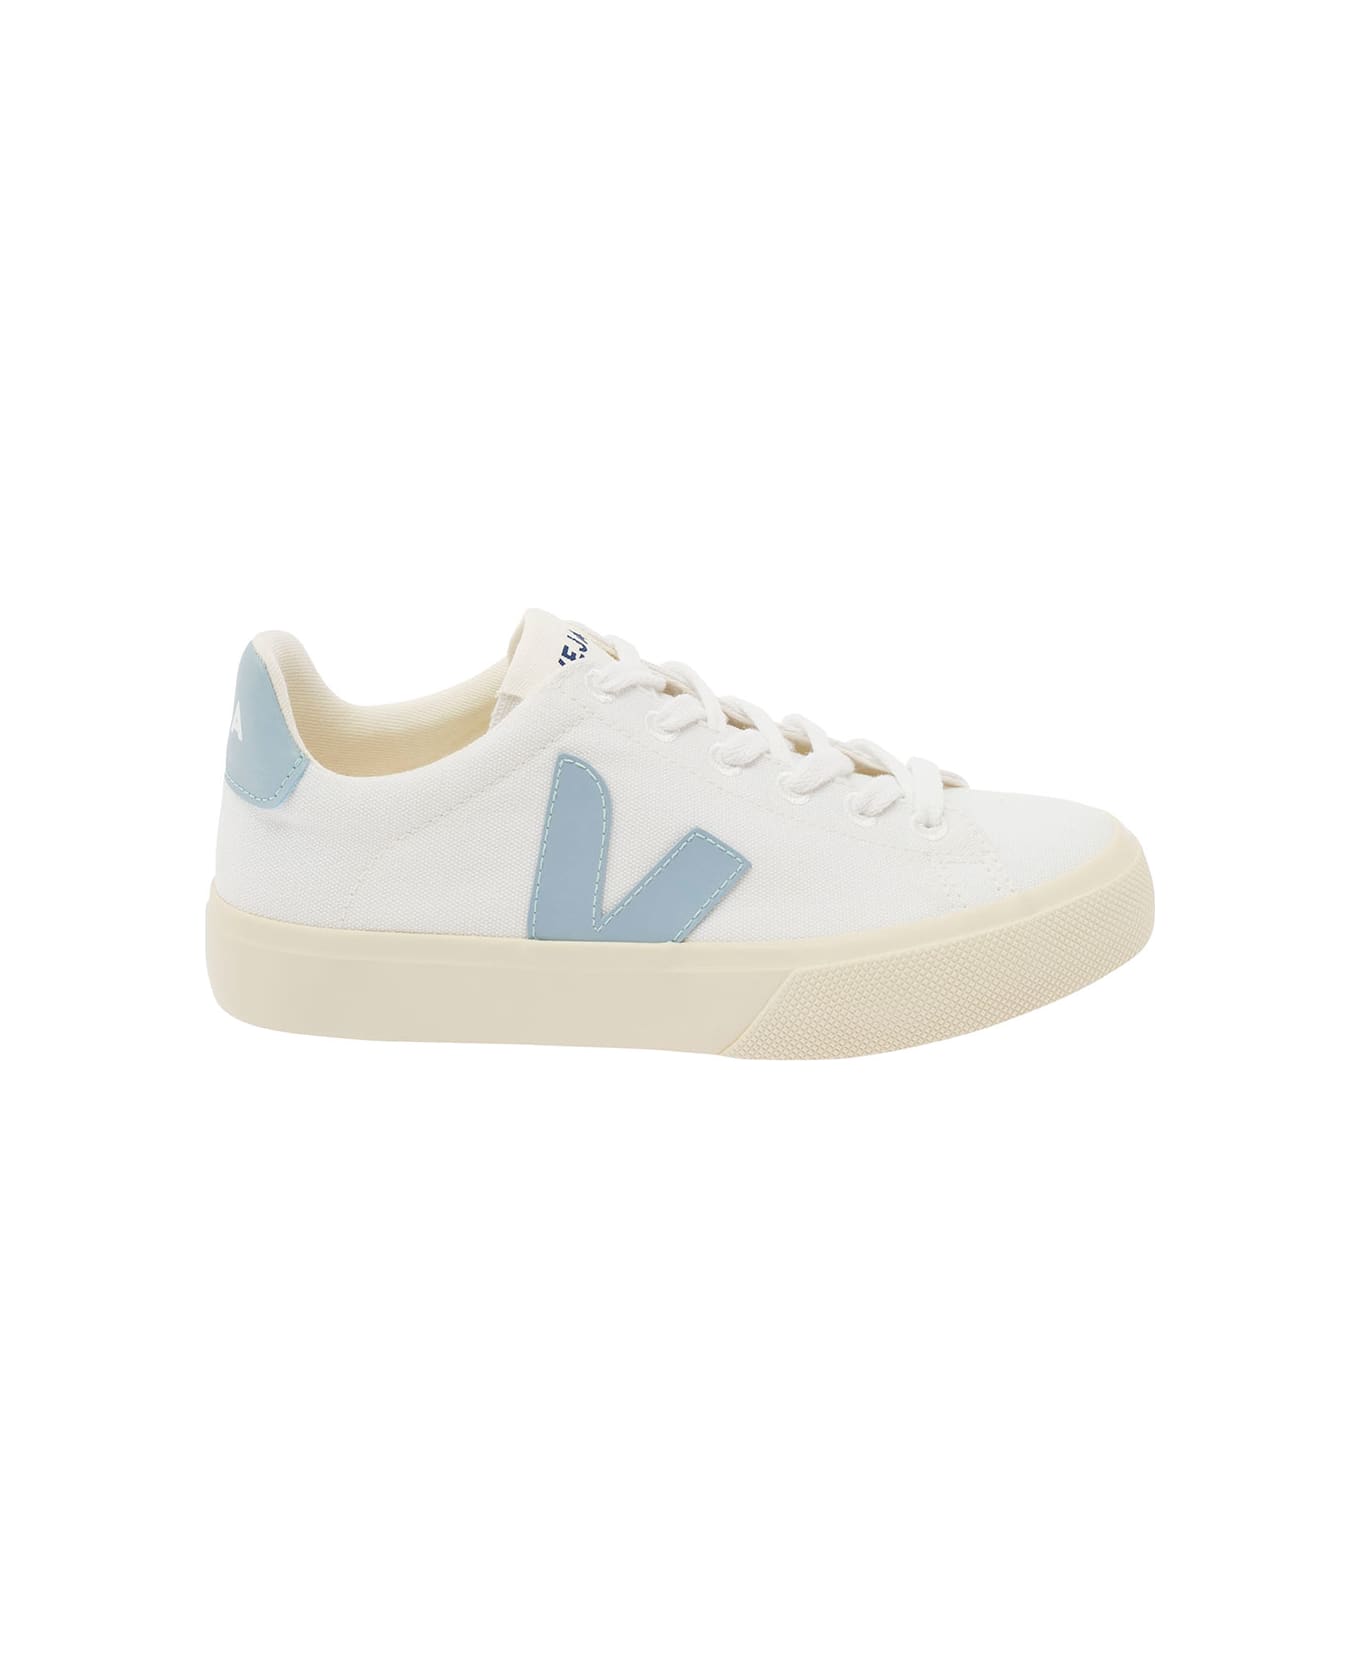 Veja White And Light Blue Sneakers With Logo Details In Leather Woman - White